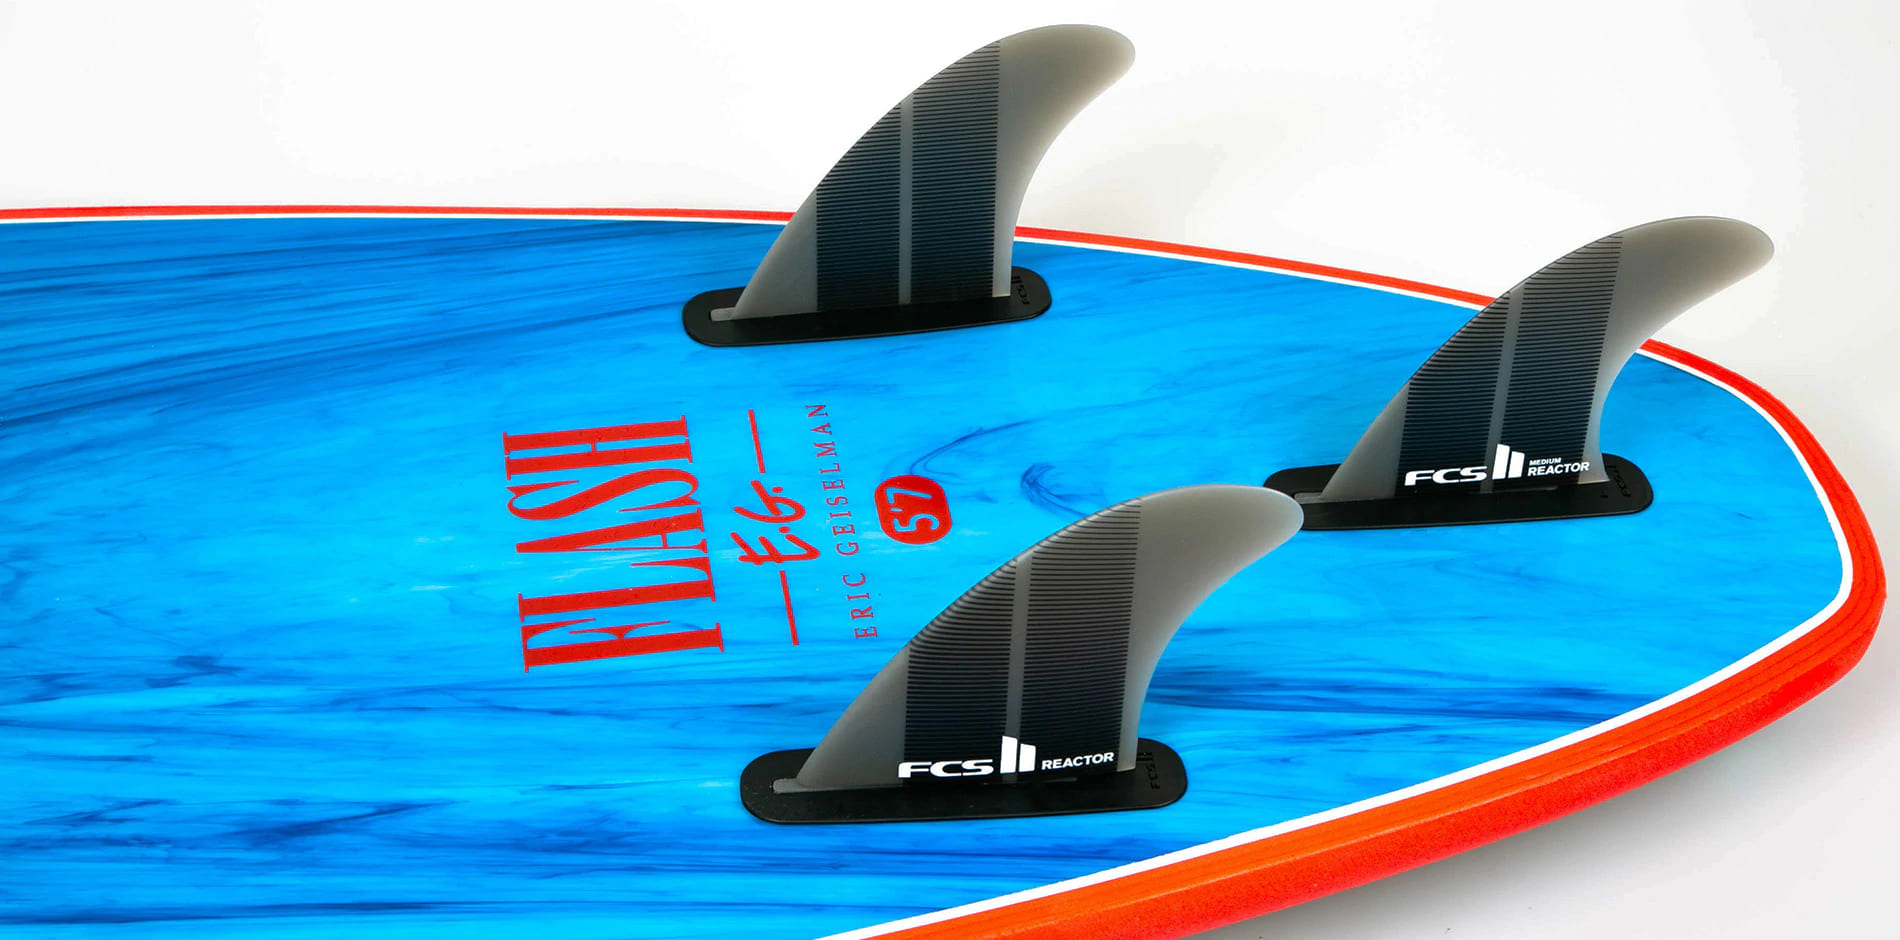 THE FCS II FIN SYSTEM